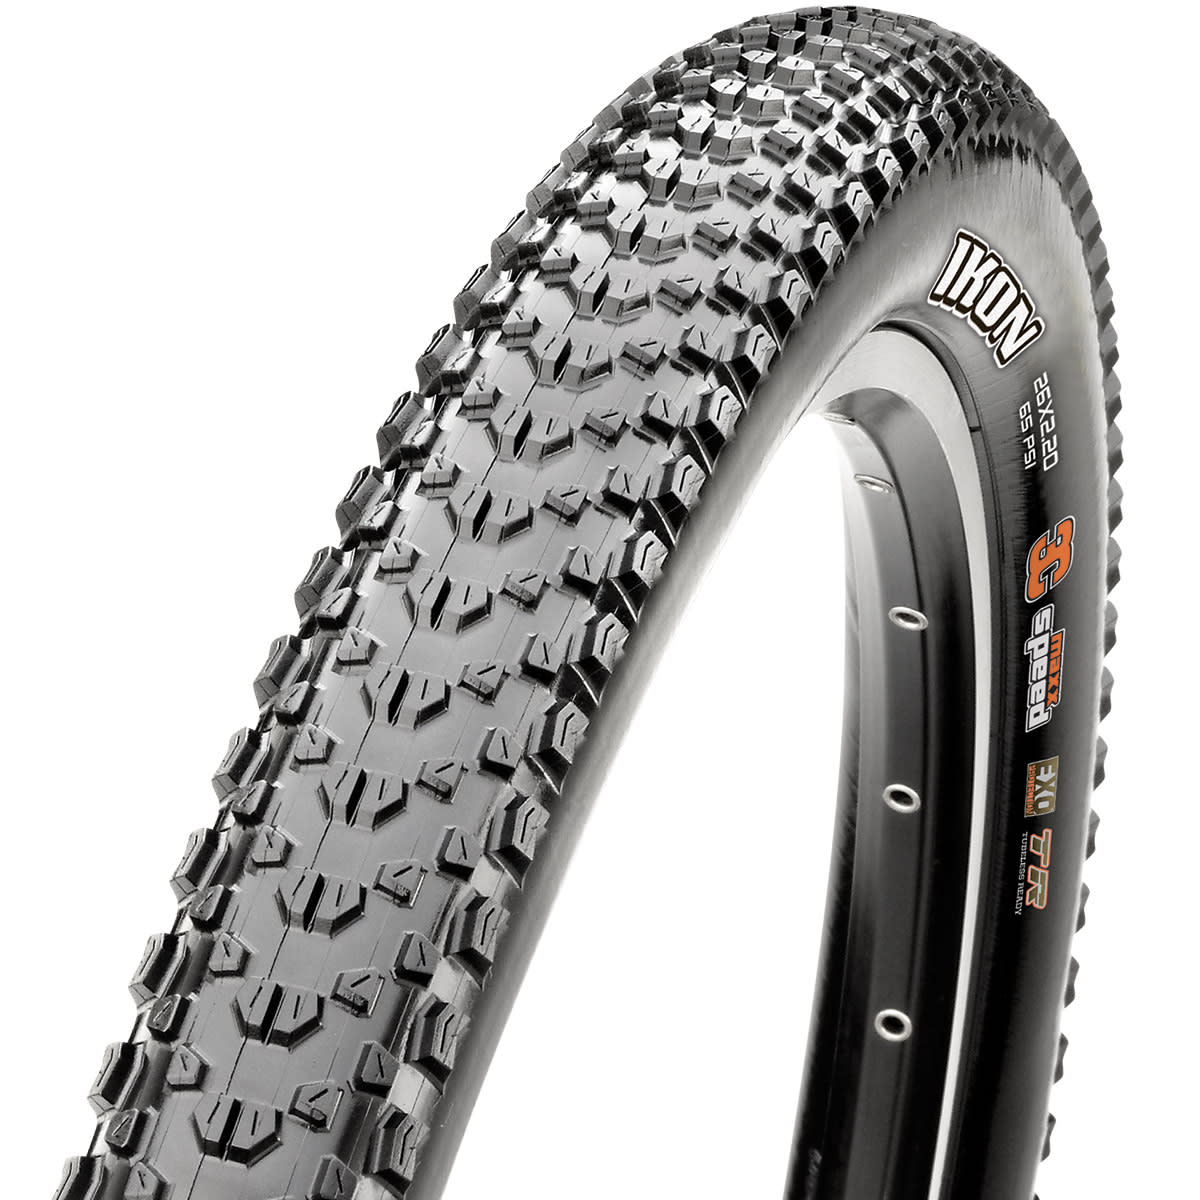 The Maxxis Ikon is a versatile XC tire designed to perform in a broad range of conditions. With its predictable handling, the Ikon is also a favorite among our slopestyle athletes.